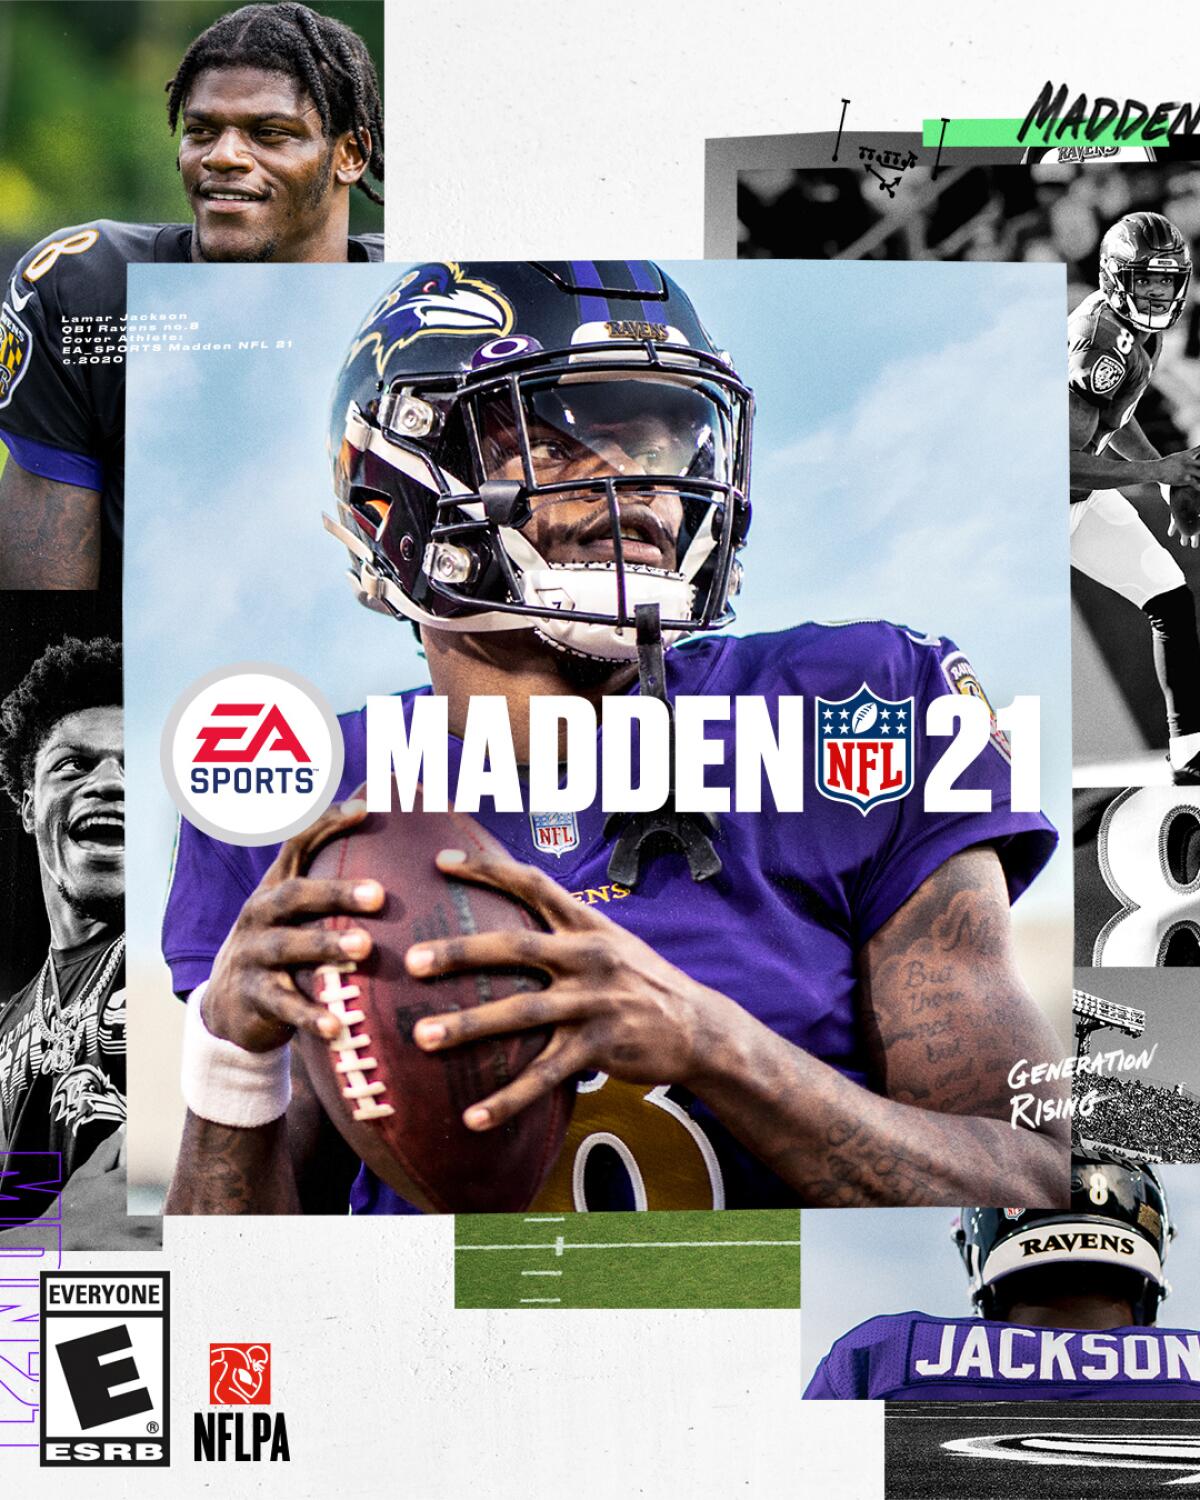 Reigning NFL MVP Jackson will appear on Madden 21 cover - The San